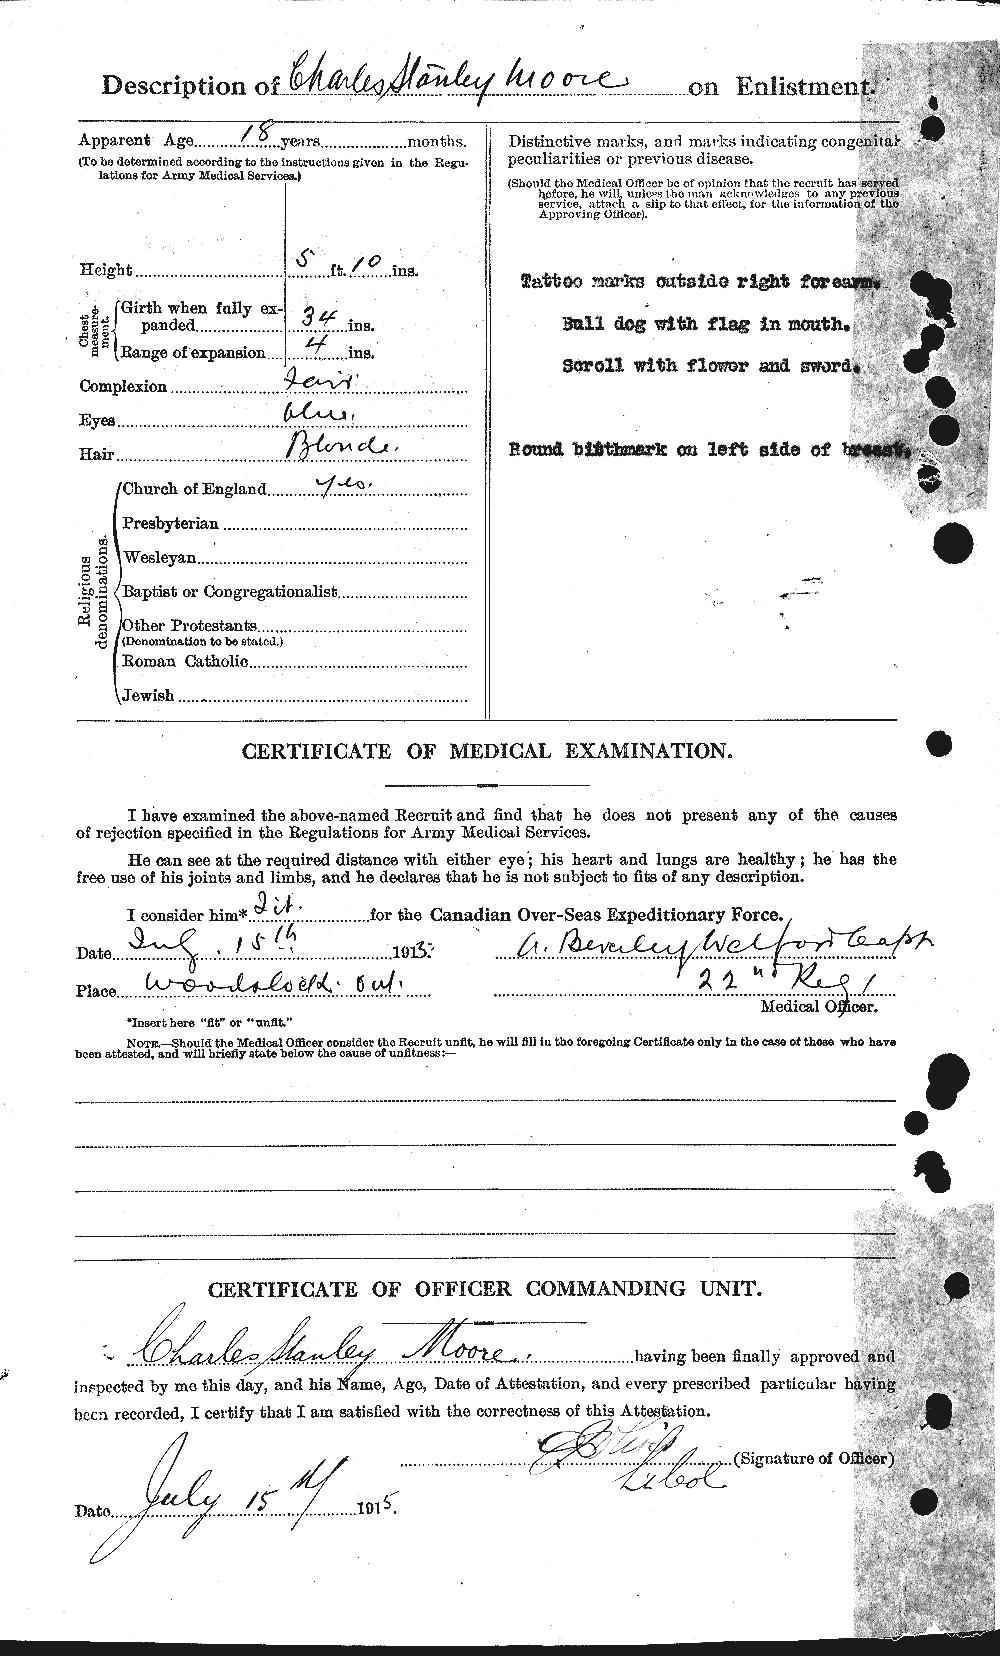 Personnel Records of the First World War - CEF 506517b